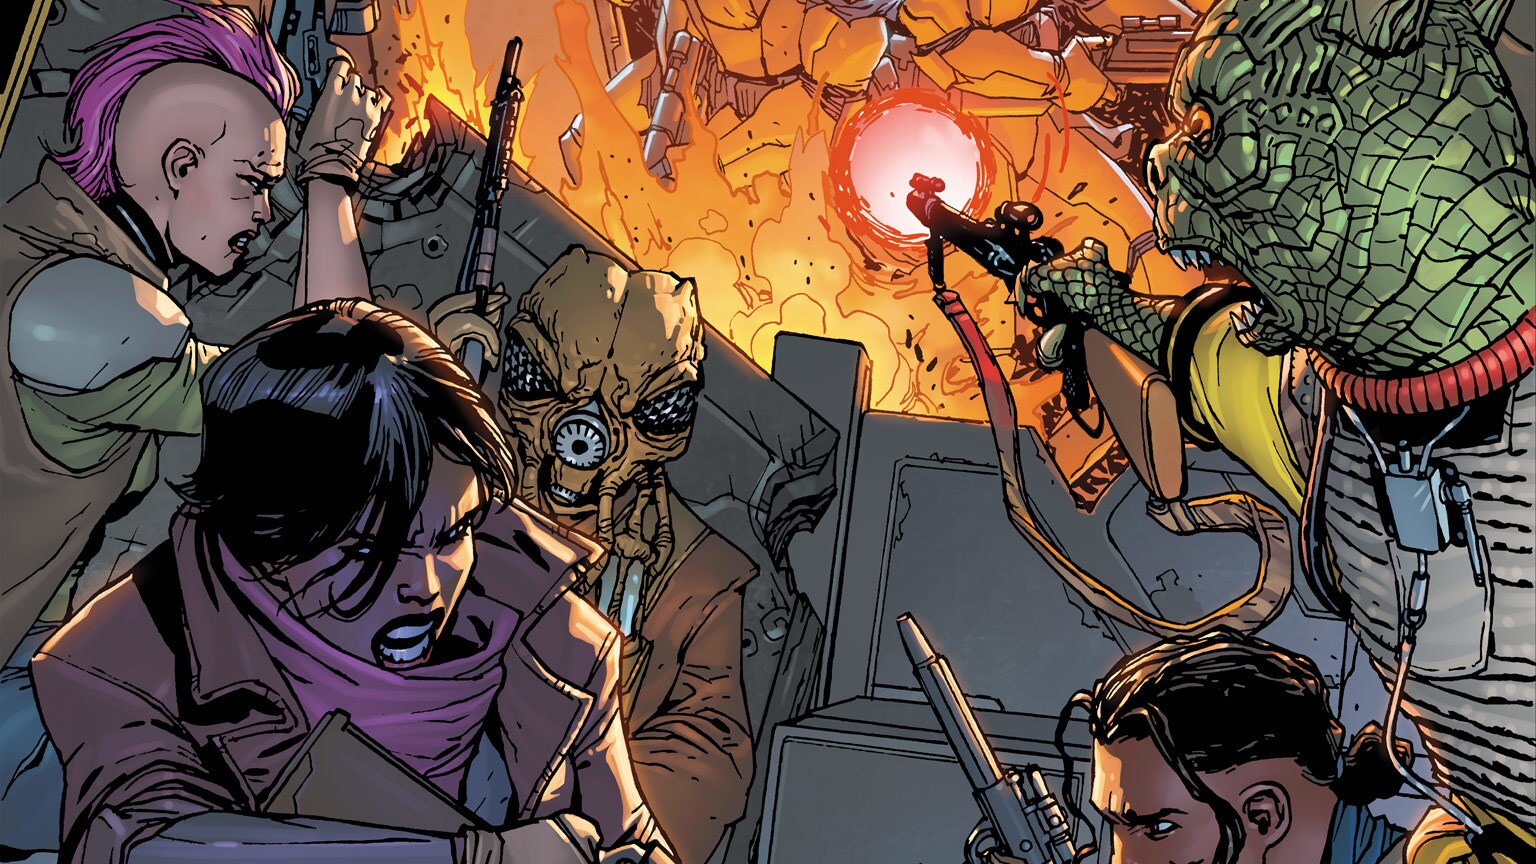 Things Don’t Go as Planned in Marvel’s Star Wars: Bounty Hunters #22 - Exclusive Preview